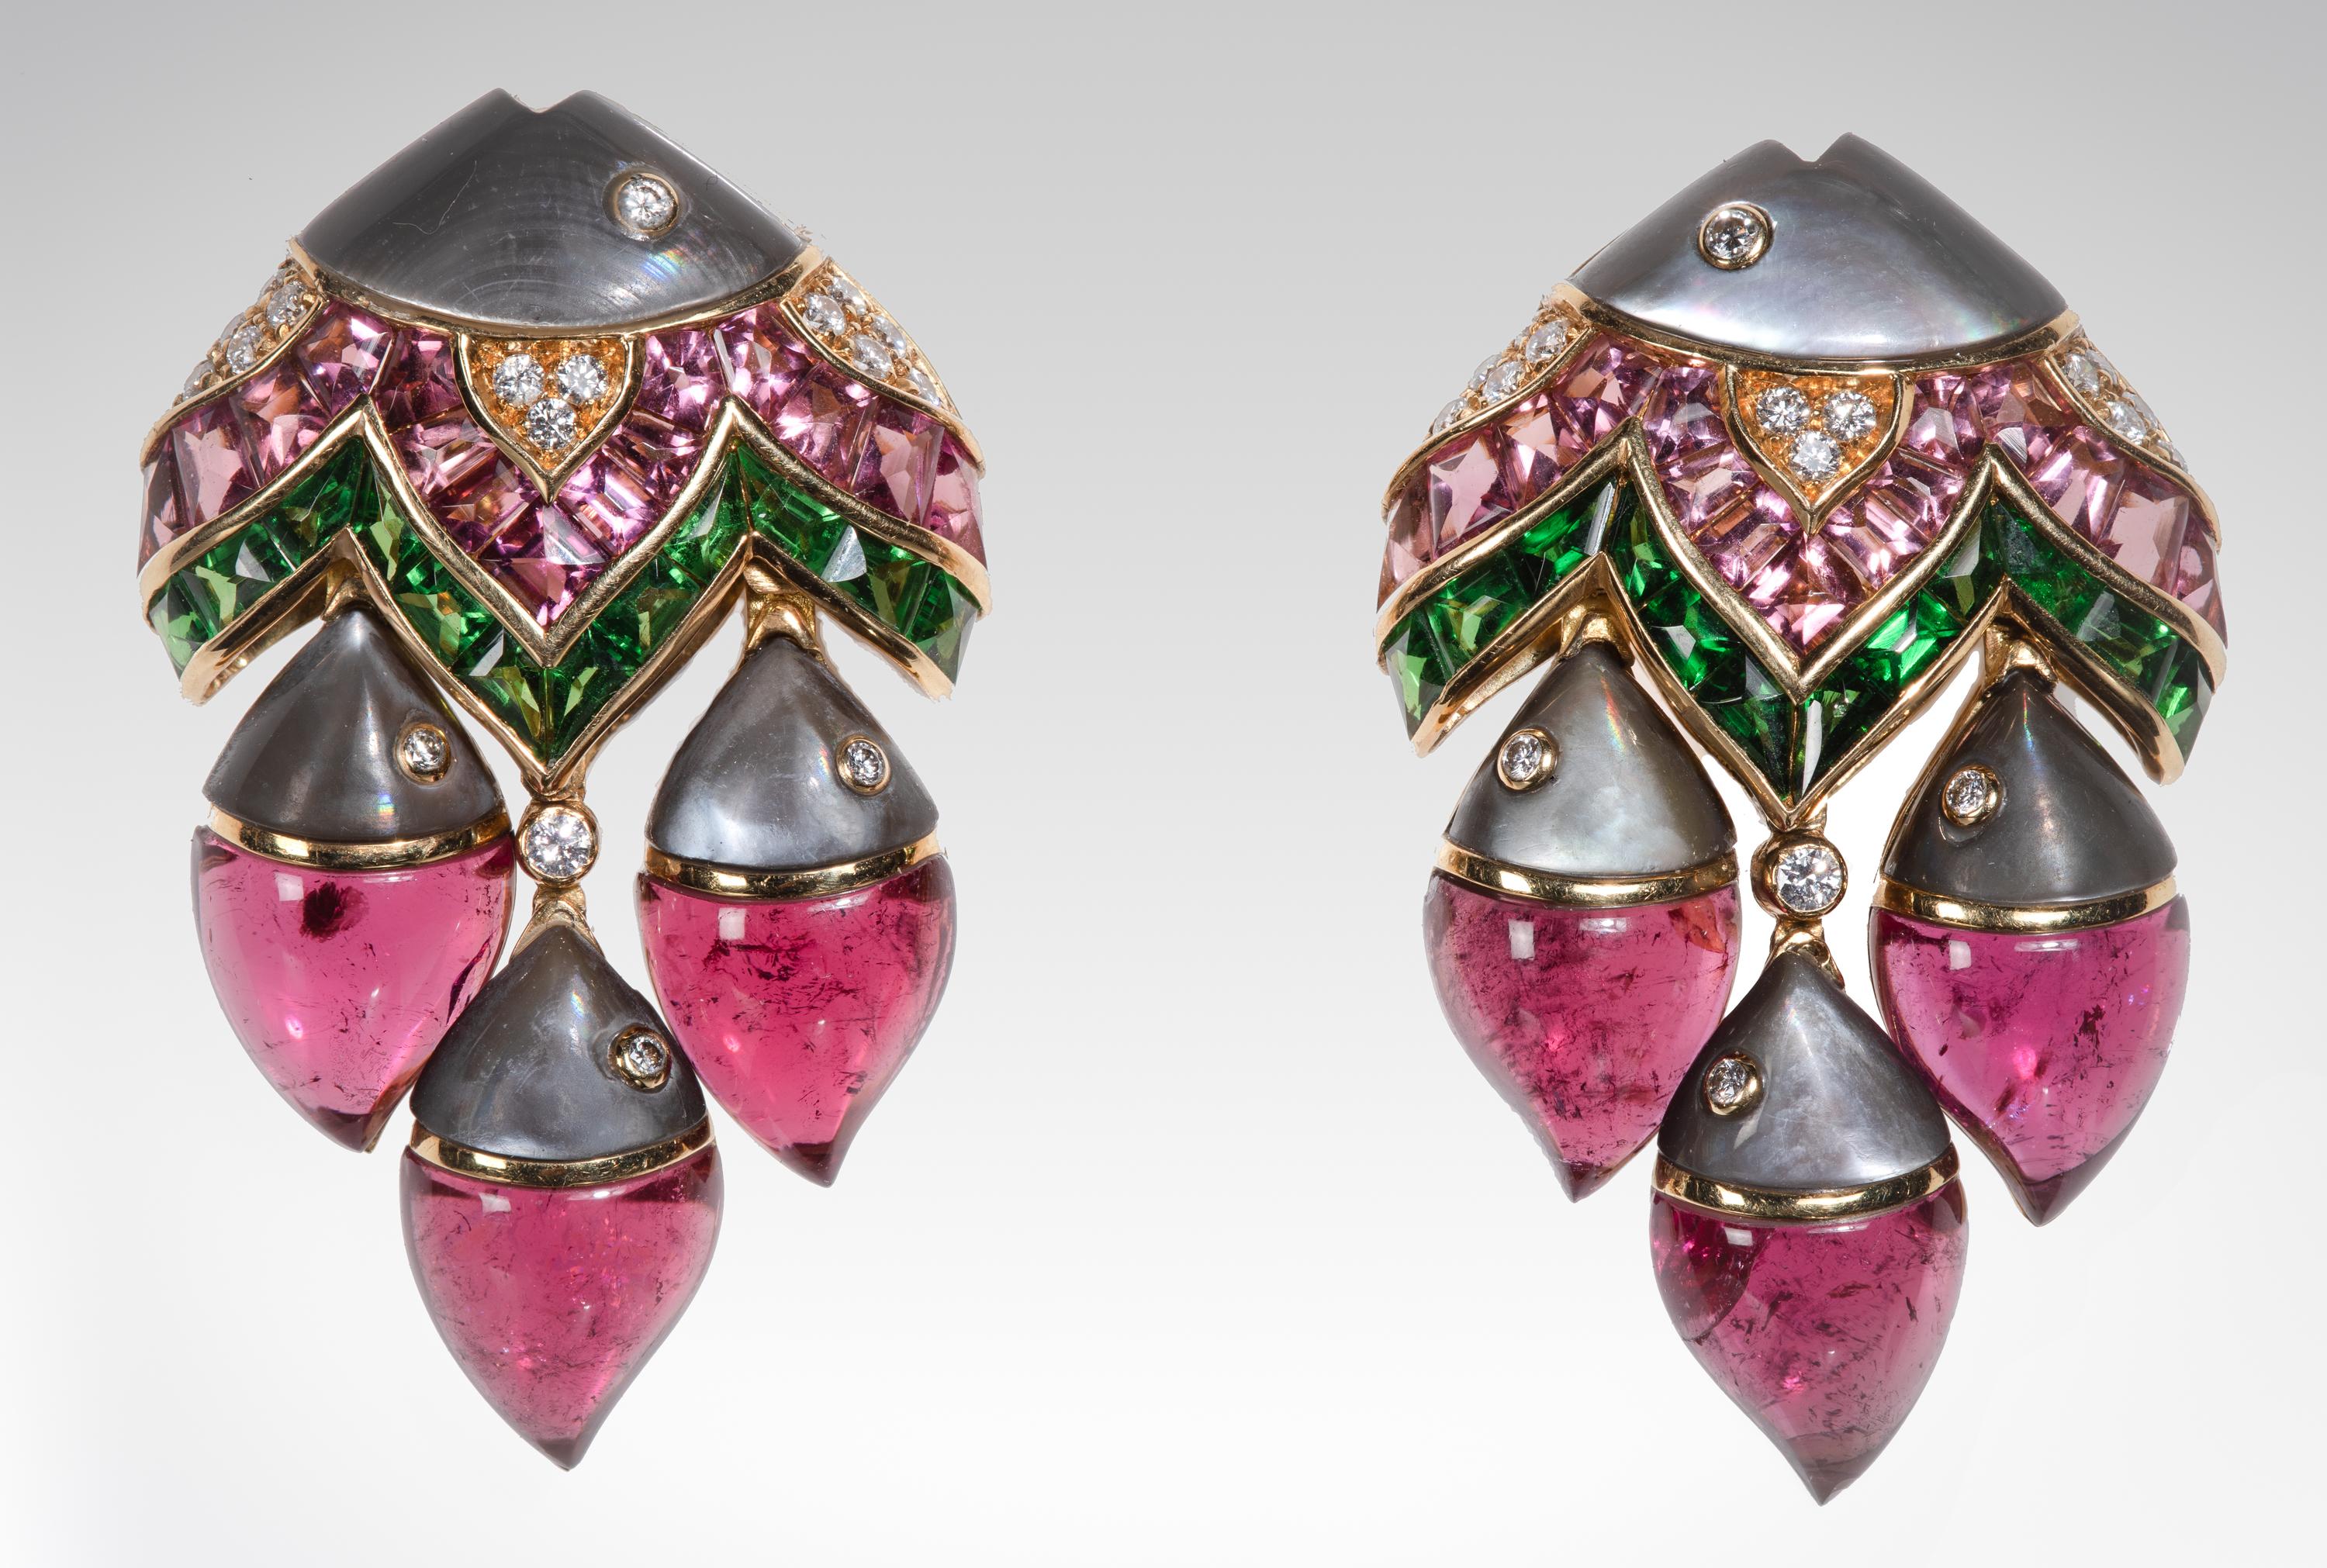 Illustrating Bulgari’s masterful color sense and flamboyant style, these “Mamma Pesce” articulated drop earrings are designed as a large stylized fish suspending three smaller fish. The mother fish is composed of pink tourmalines, tsavorite garnets,